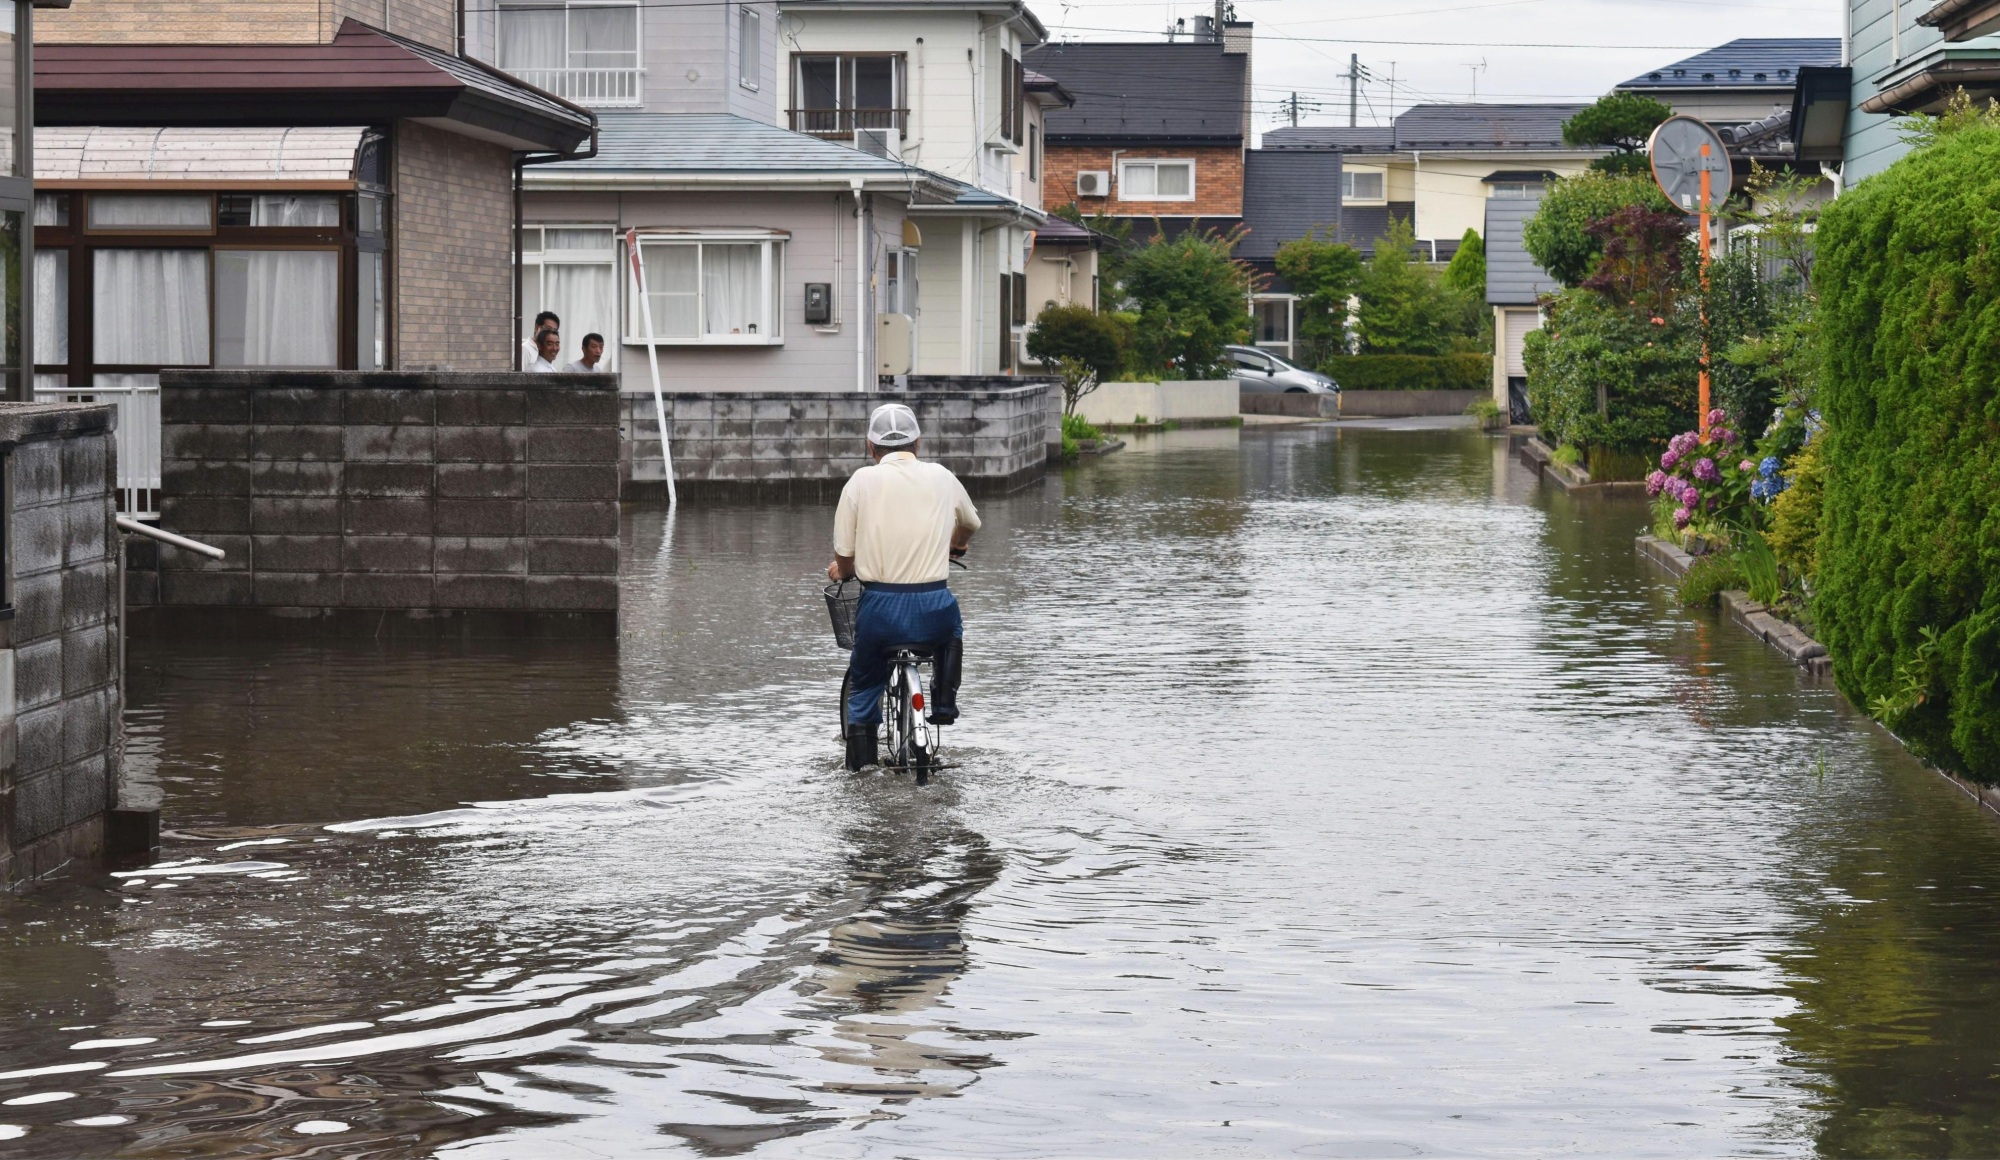 A man rides his bicycle through floodwaters in the city of Akita on Sunday. | KYODO